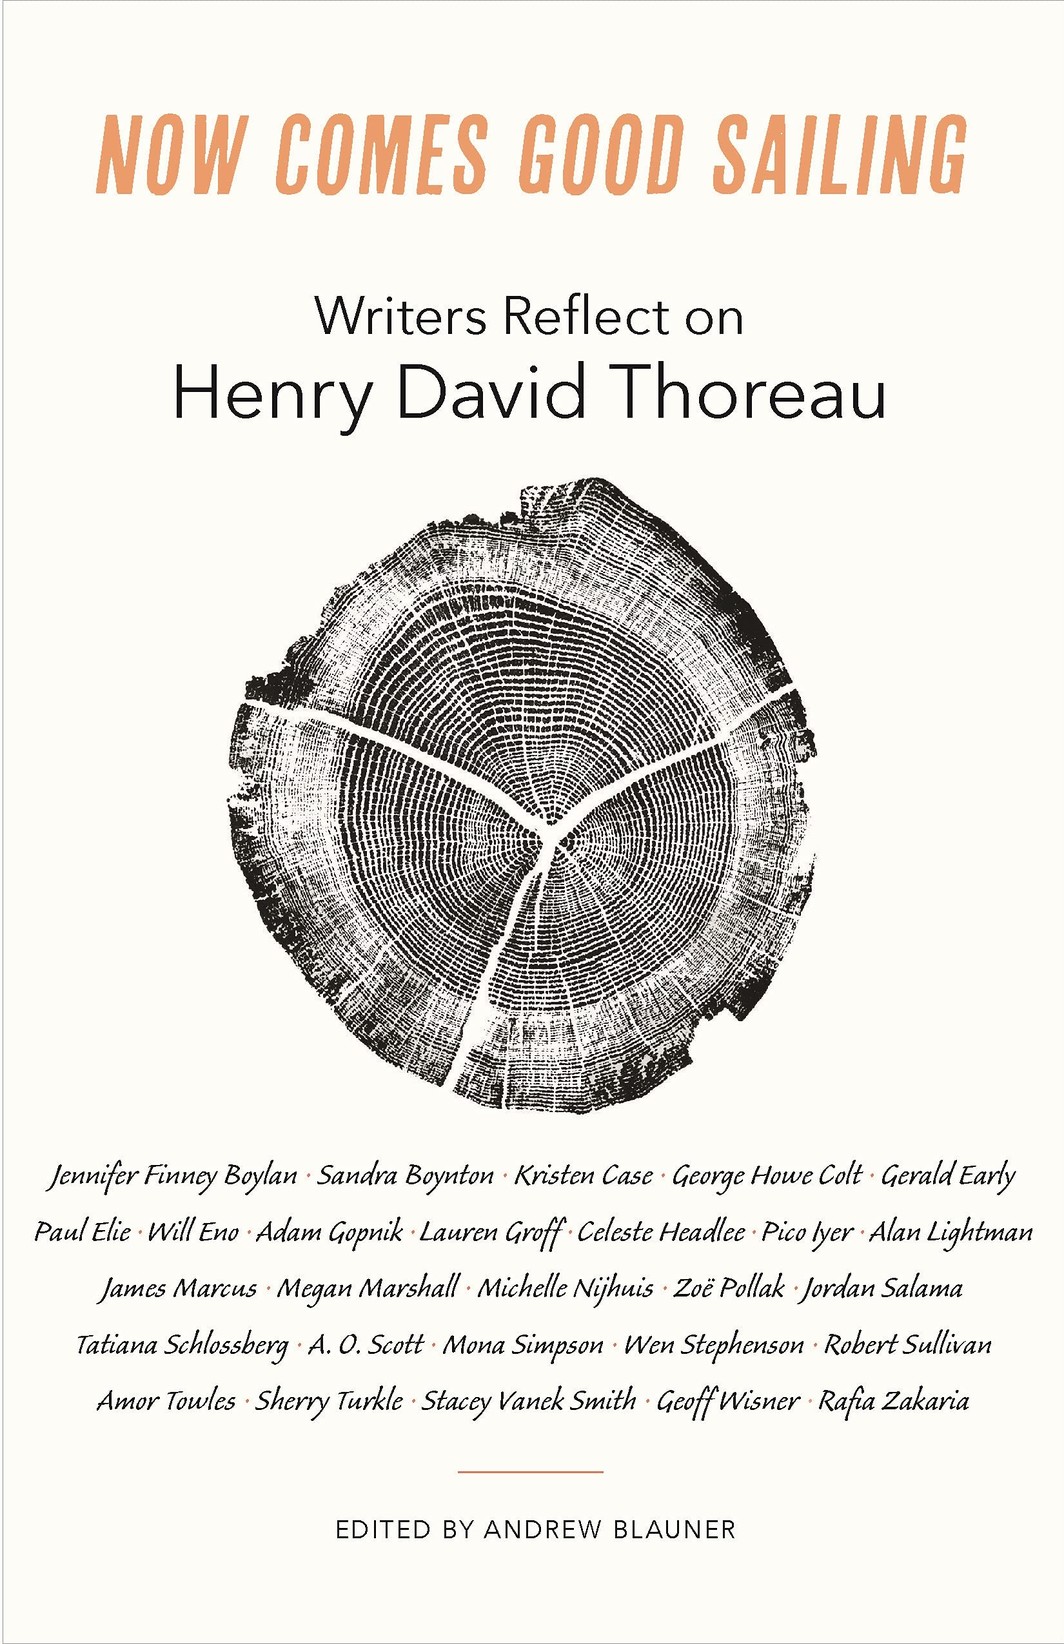 The cover of Now Comes Good Sailing: Writers Reflect on Henry David Thoreau